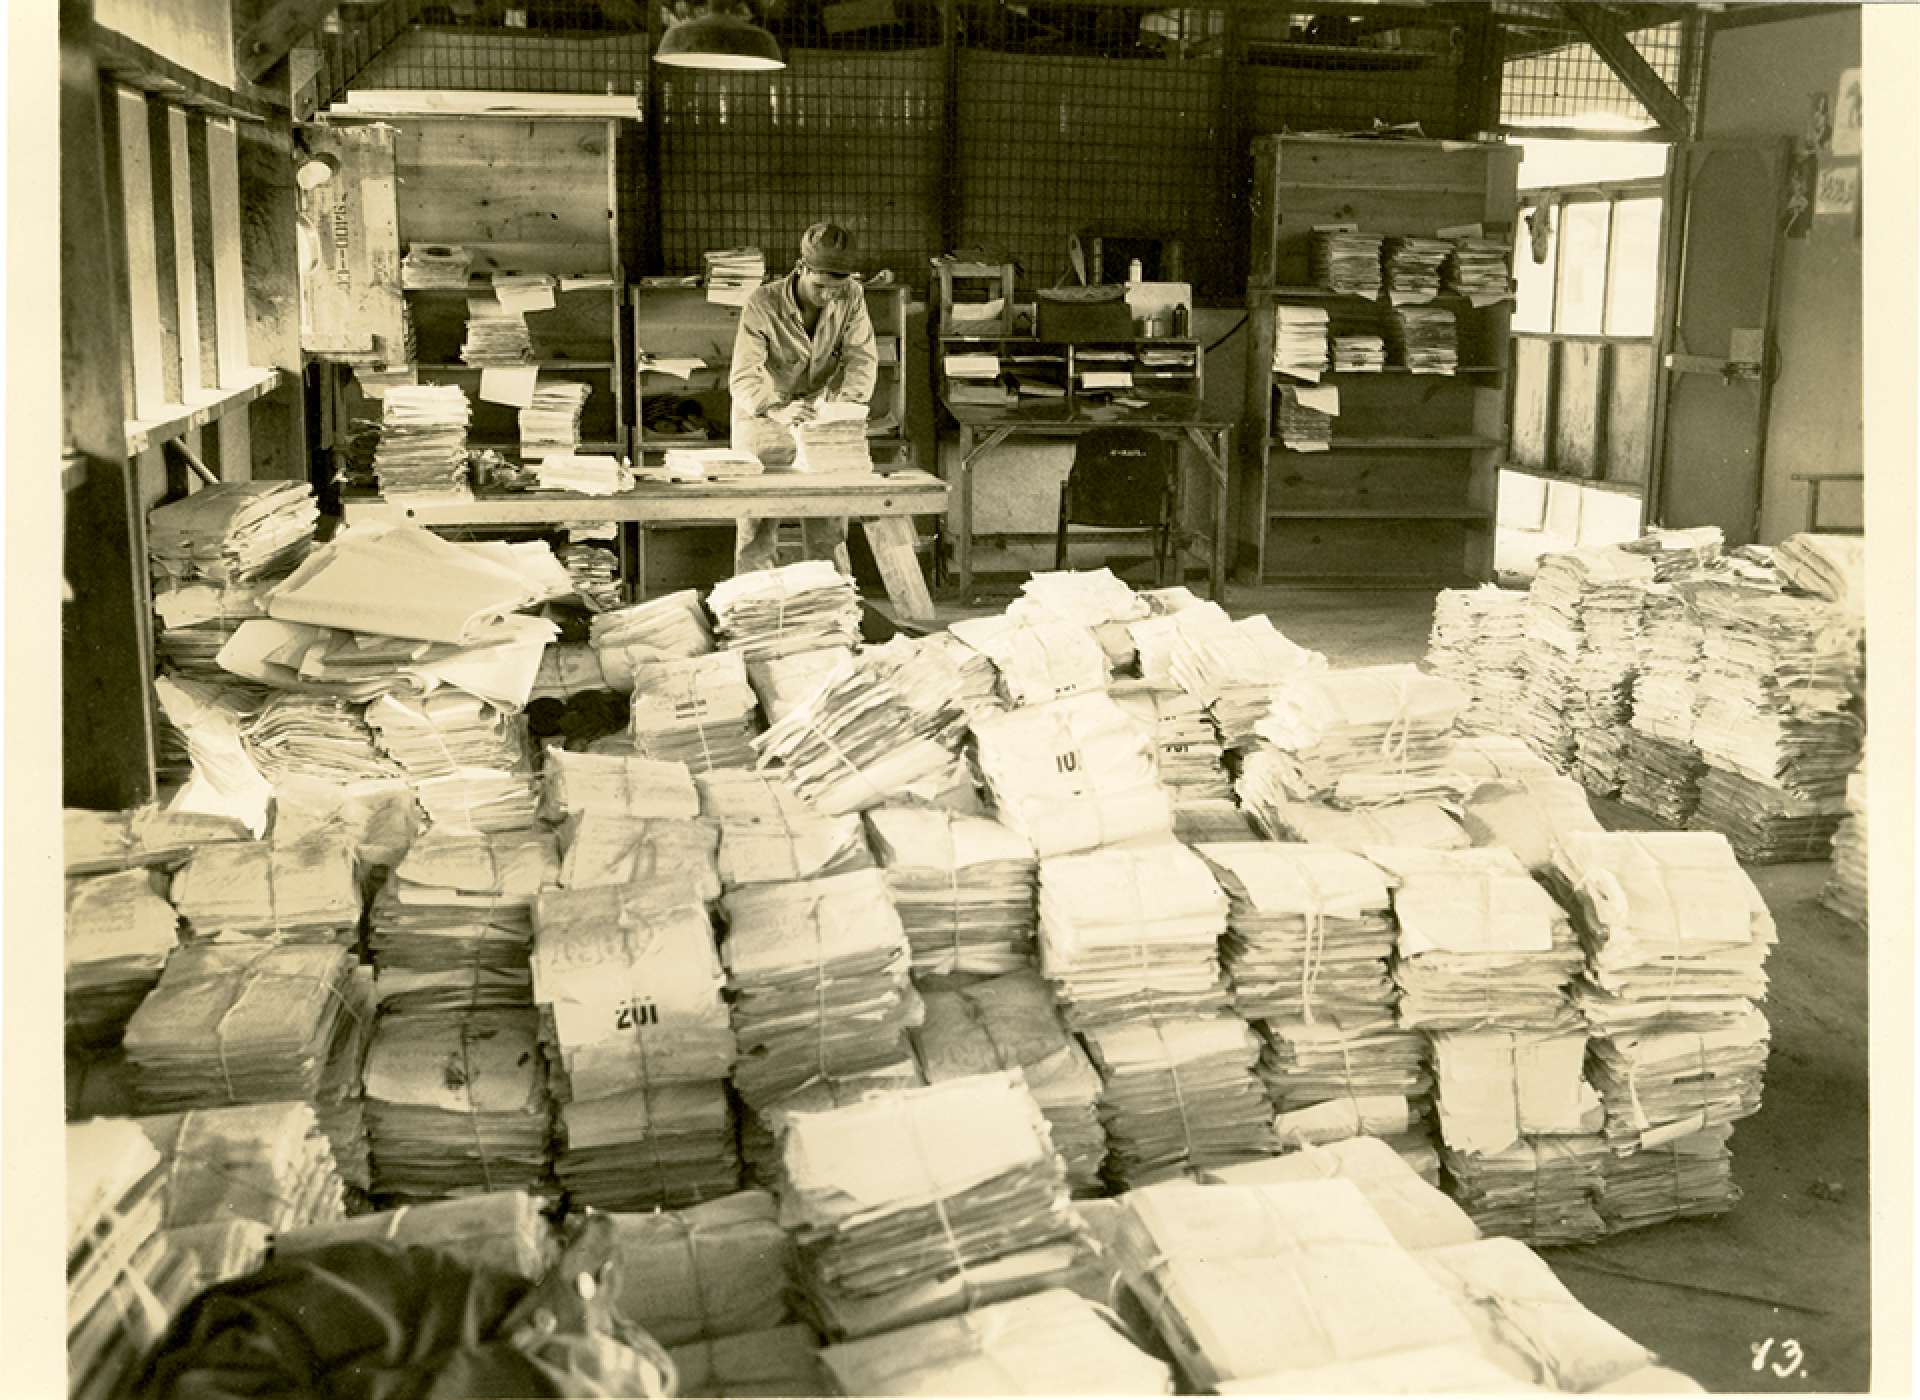 V-mail operation in the field at APO 929.&quot;The retake department where all originals of V-Mail are stored until destruction orders are issued by the States. Destruction orders are not issued until the States stations have satisfactorily reproduced every letter on a roll. Should the States advise that certain letters must be rephotographed, the proper bundle must be located and the letter withdrawn to be recorded again.